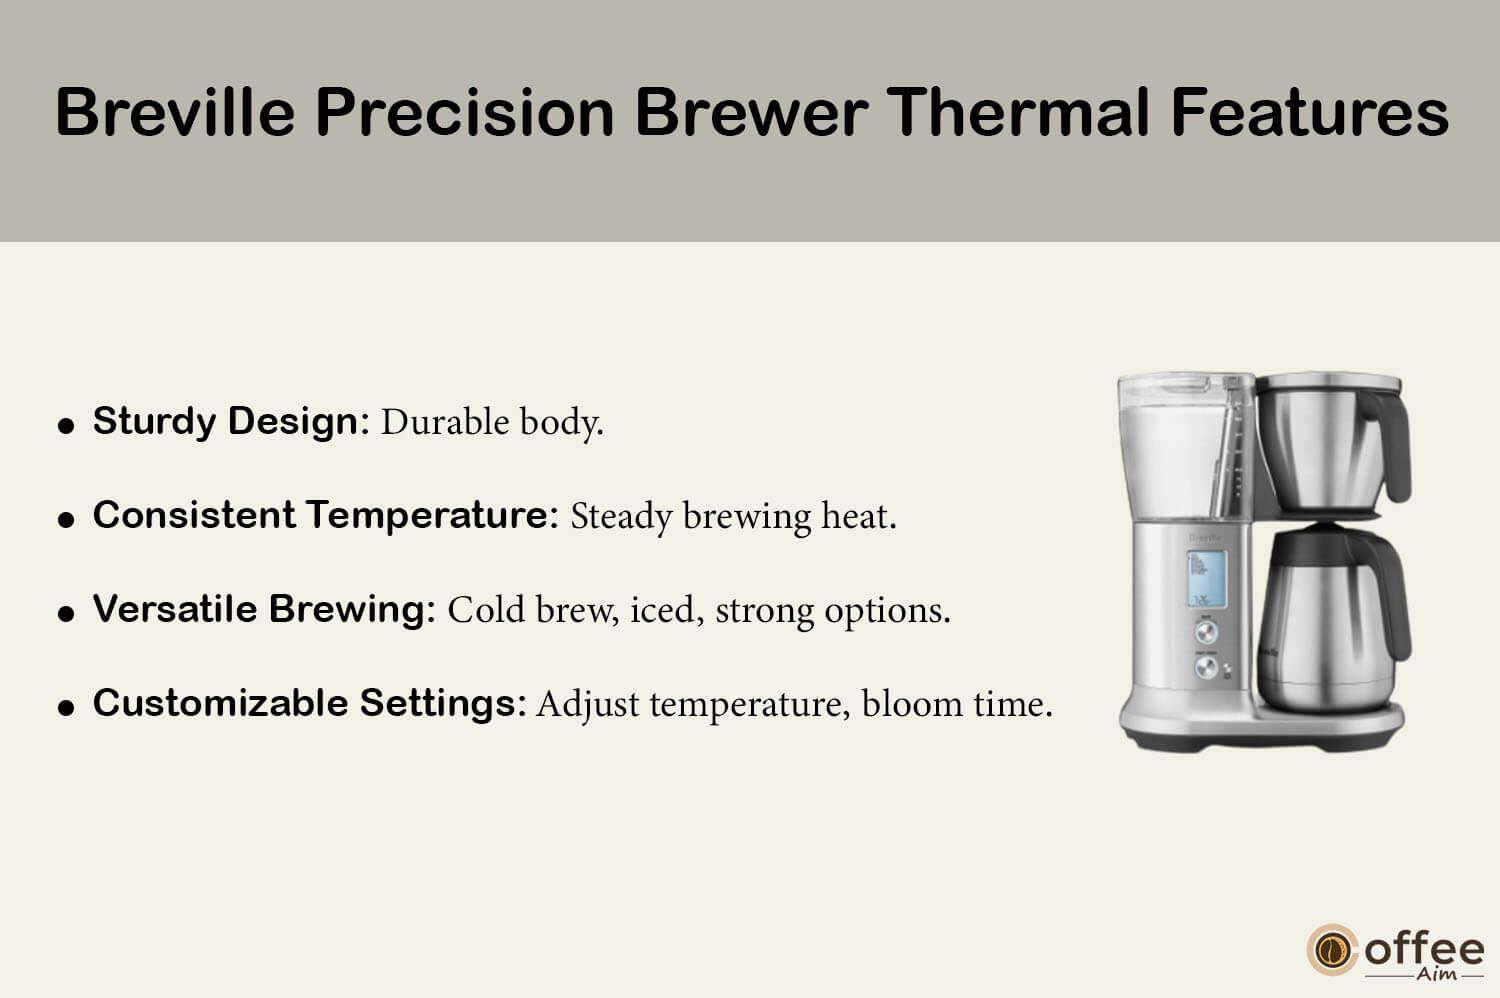 "This image highlights the key features of the 'Breville Precision Brewer Thermal' for our in-depth article titled 'Breville Precision Brewer Thermal Review'."